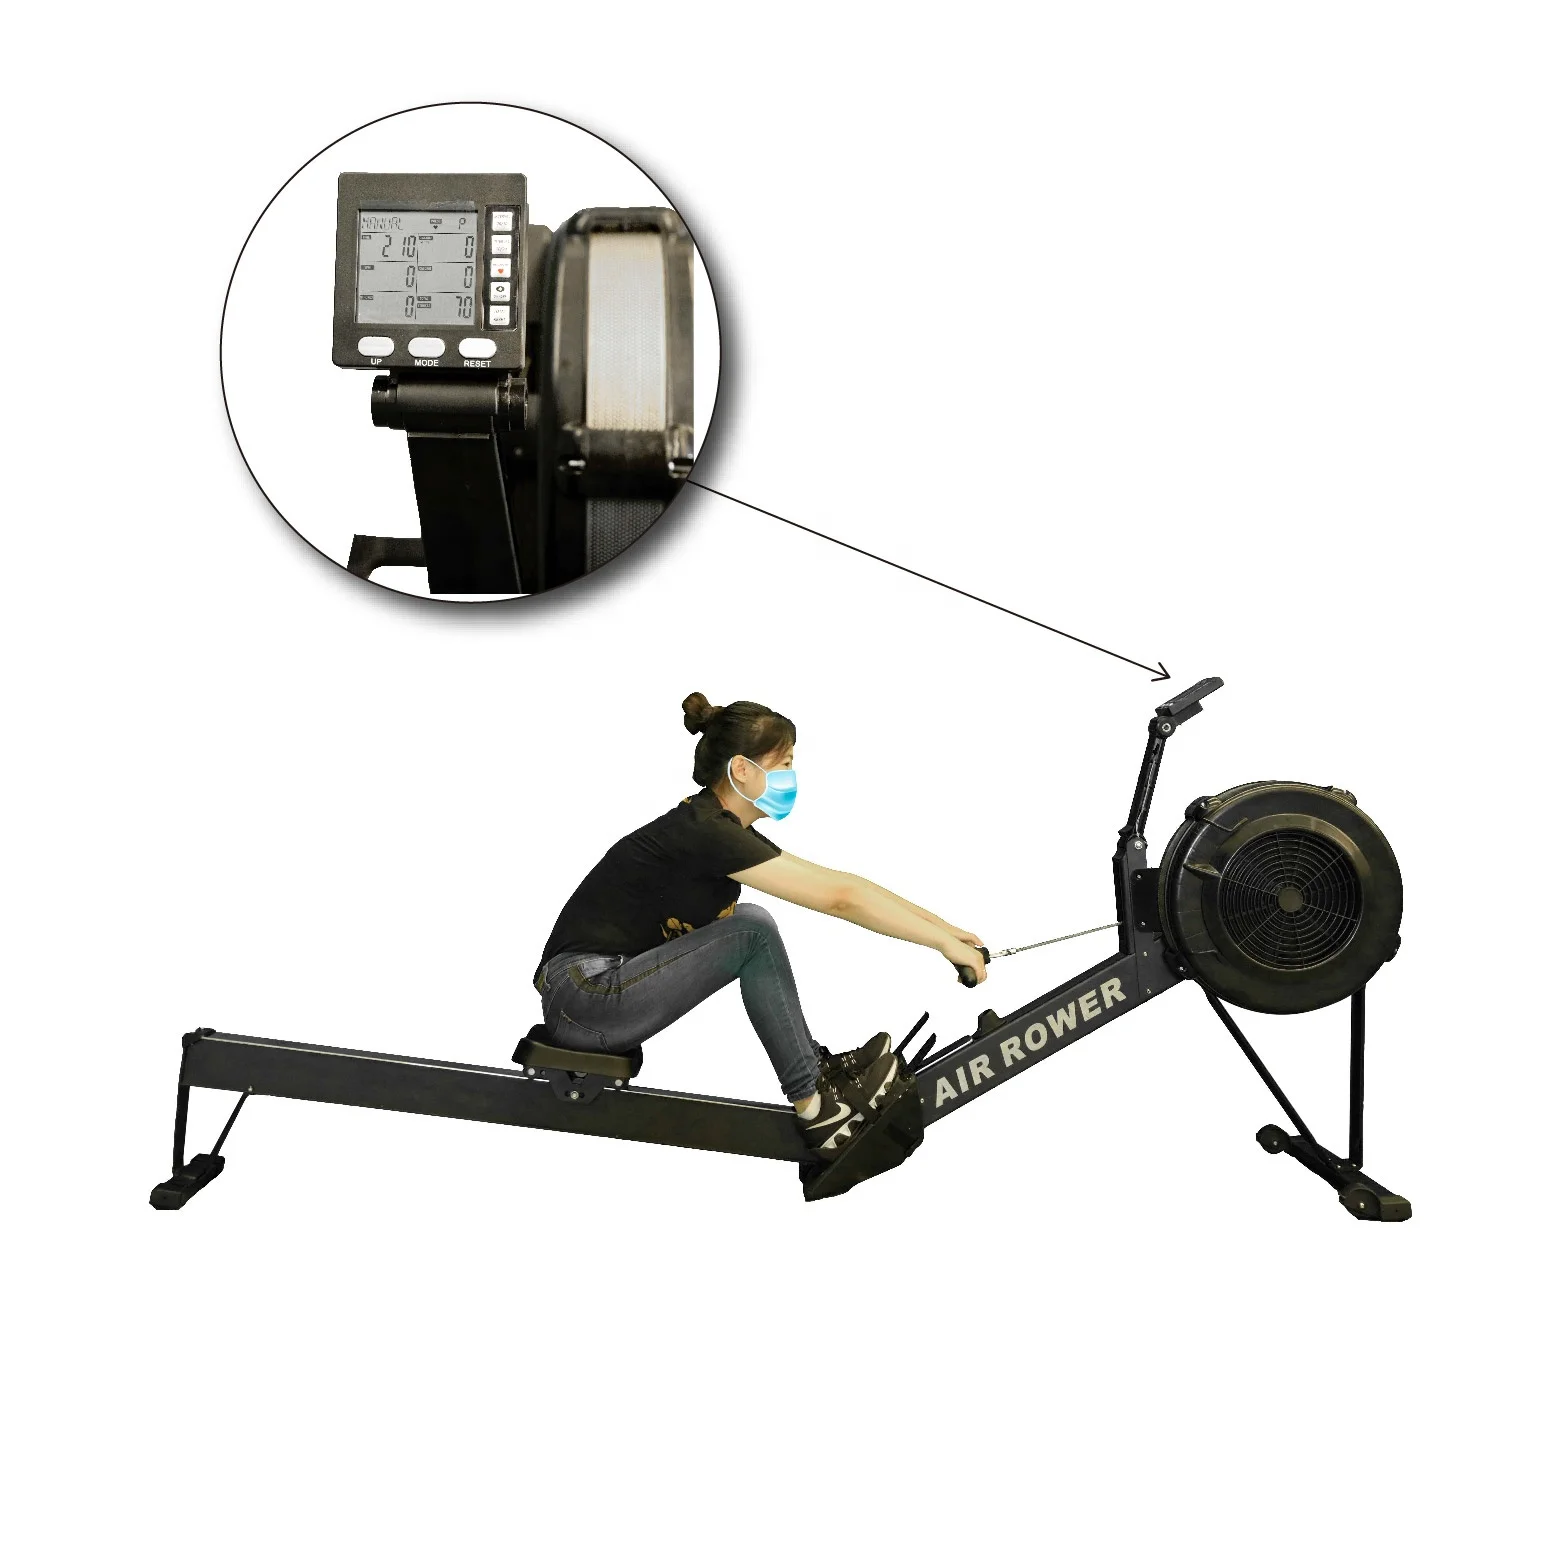 

Ship from France warehouse 2 fitness equipment concept air rower rowing machine for club/gym/home with factory price